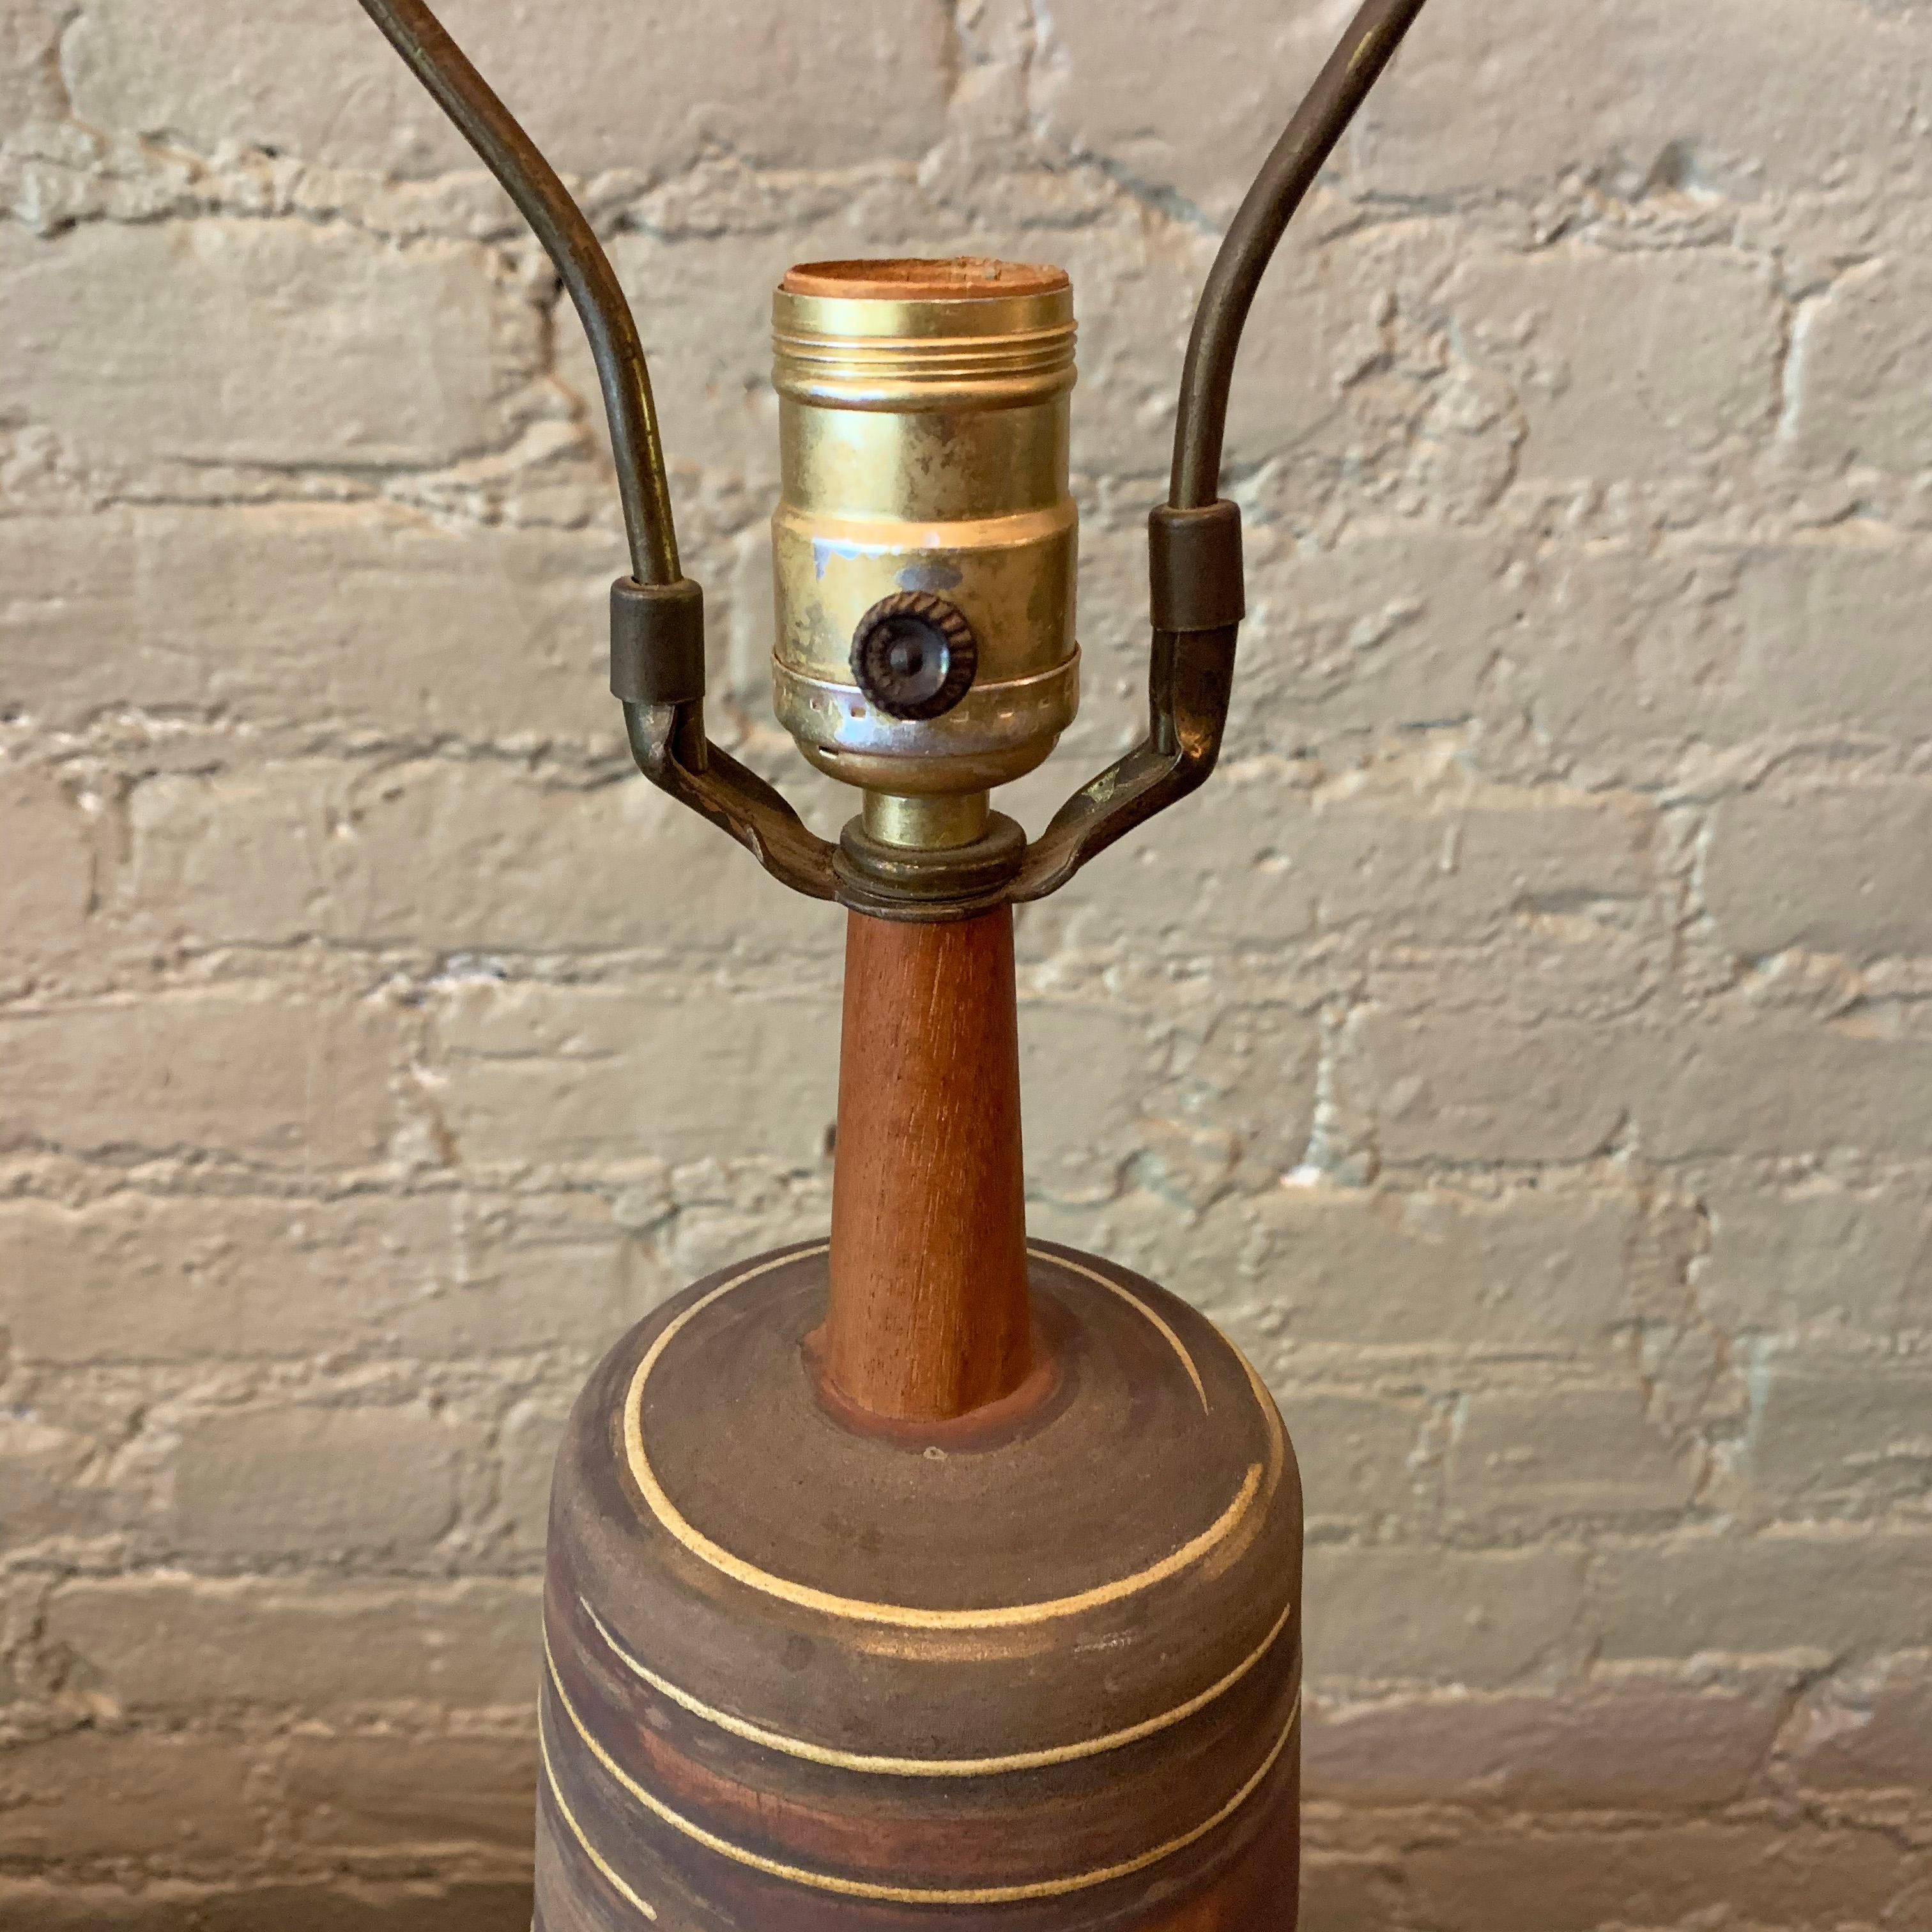 Midcentury Art Pottery Table Lamp by Gordon Martz For Marshall Studios In Good Condition For Sale In Brooklyn, NY